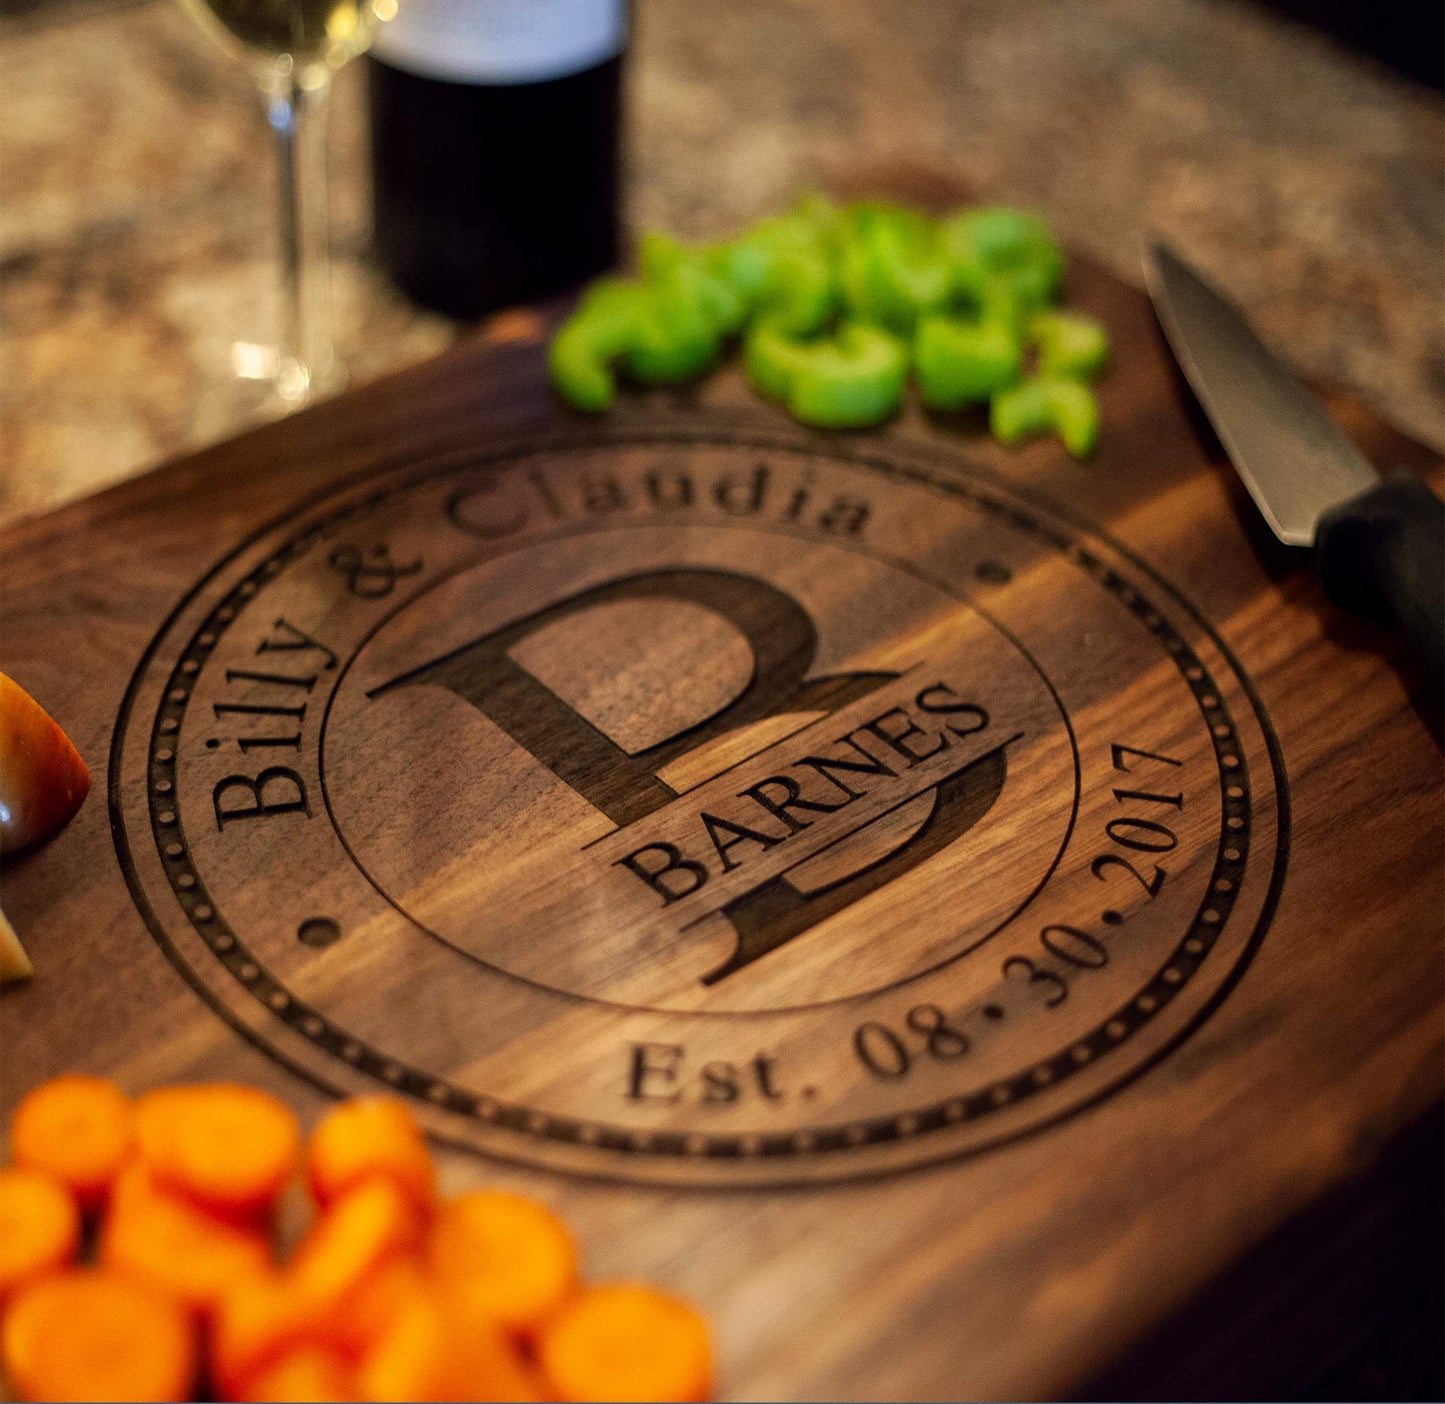 USA Hand Crafted Custom Cutting Boards Make Great mens gifts for Christmas Gifts for Woman or Wedding gifts, Anniversary Gifts, or Christmas Gifts